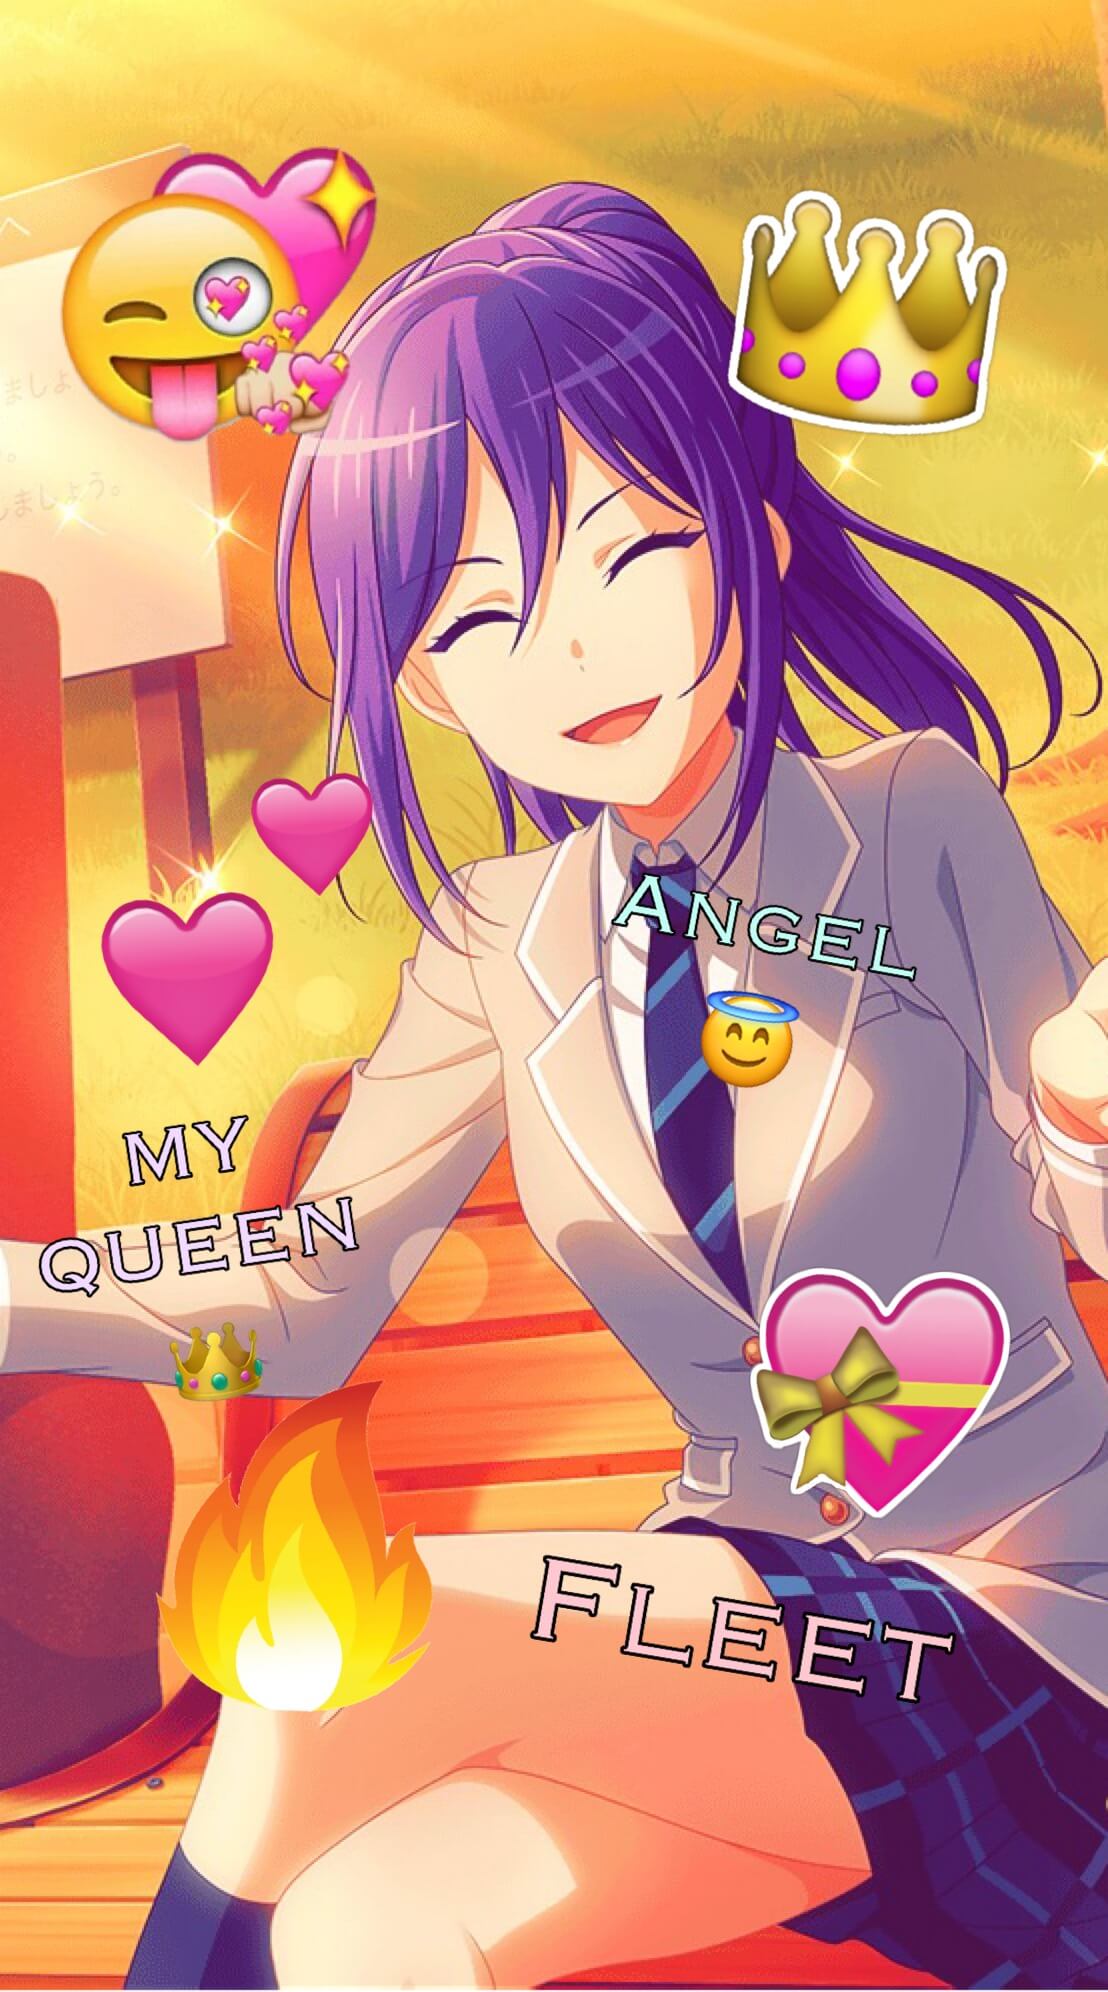 This is how I feel about Kaoru my baby & my child


FLEET